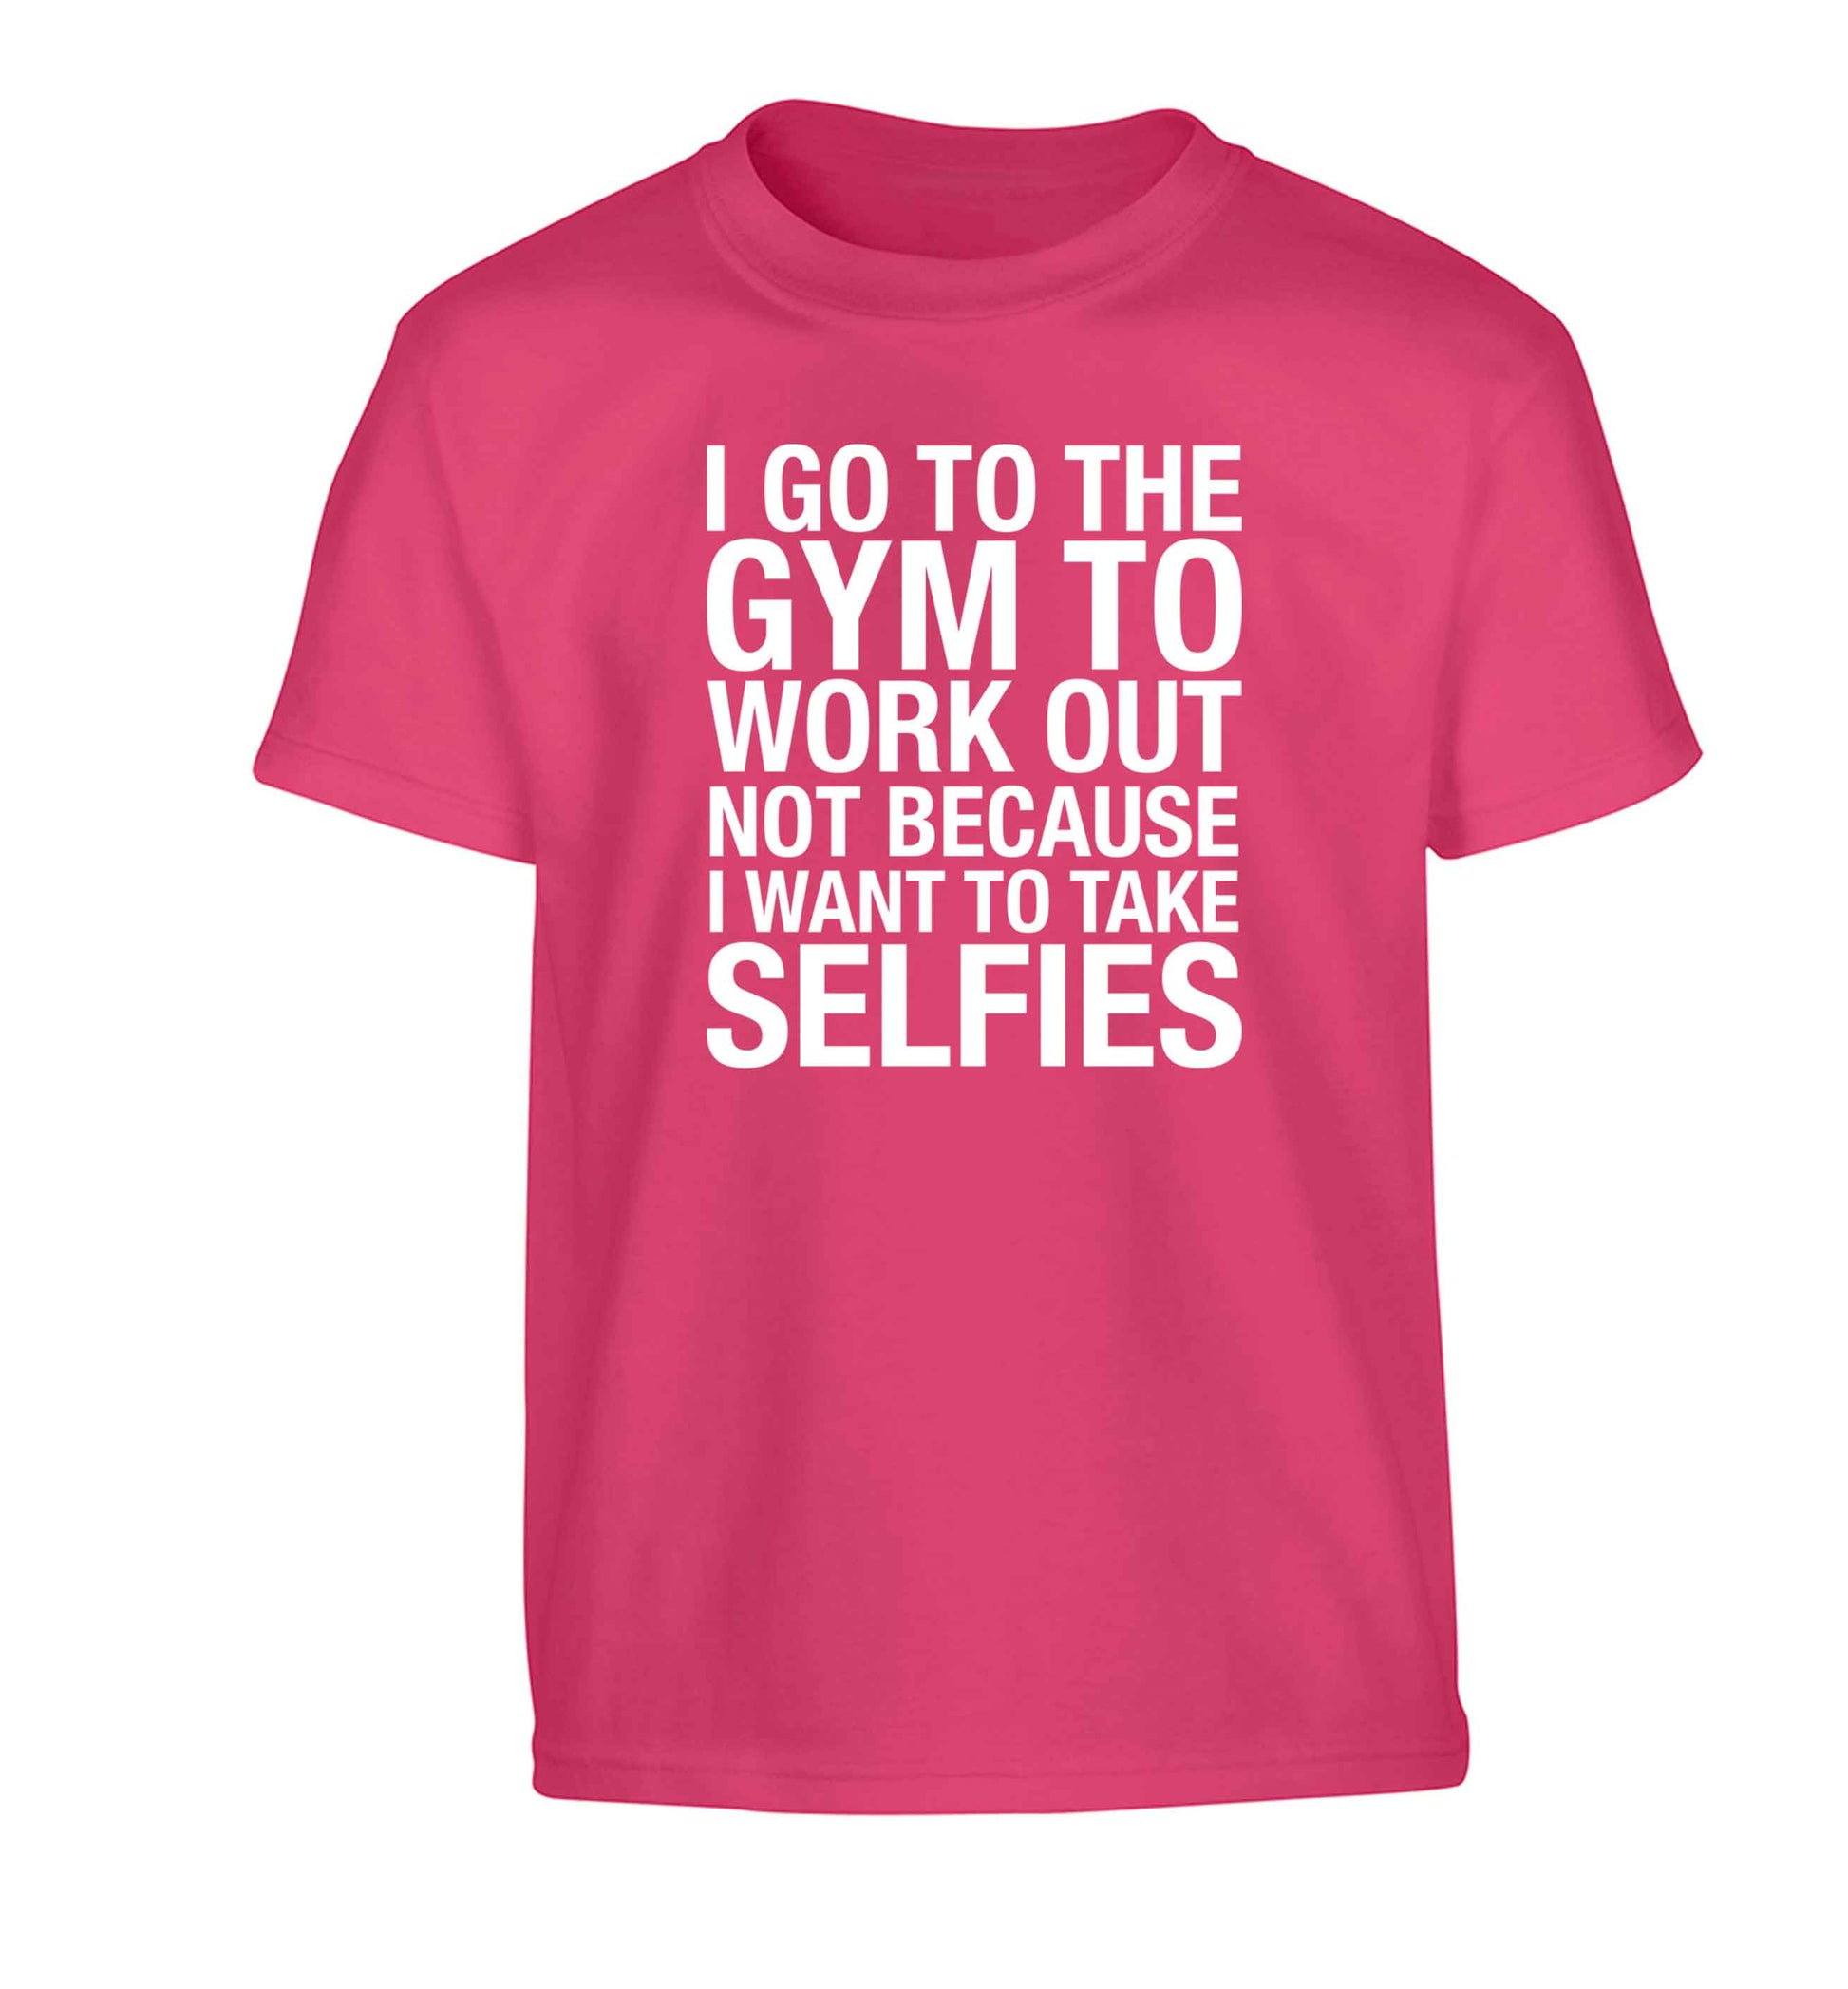 I go to the gym to workout not to take selfies Children's pink Tshirt 12-13 Years